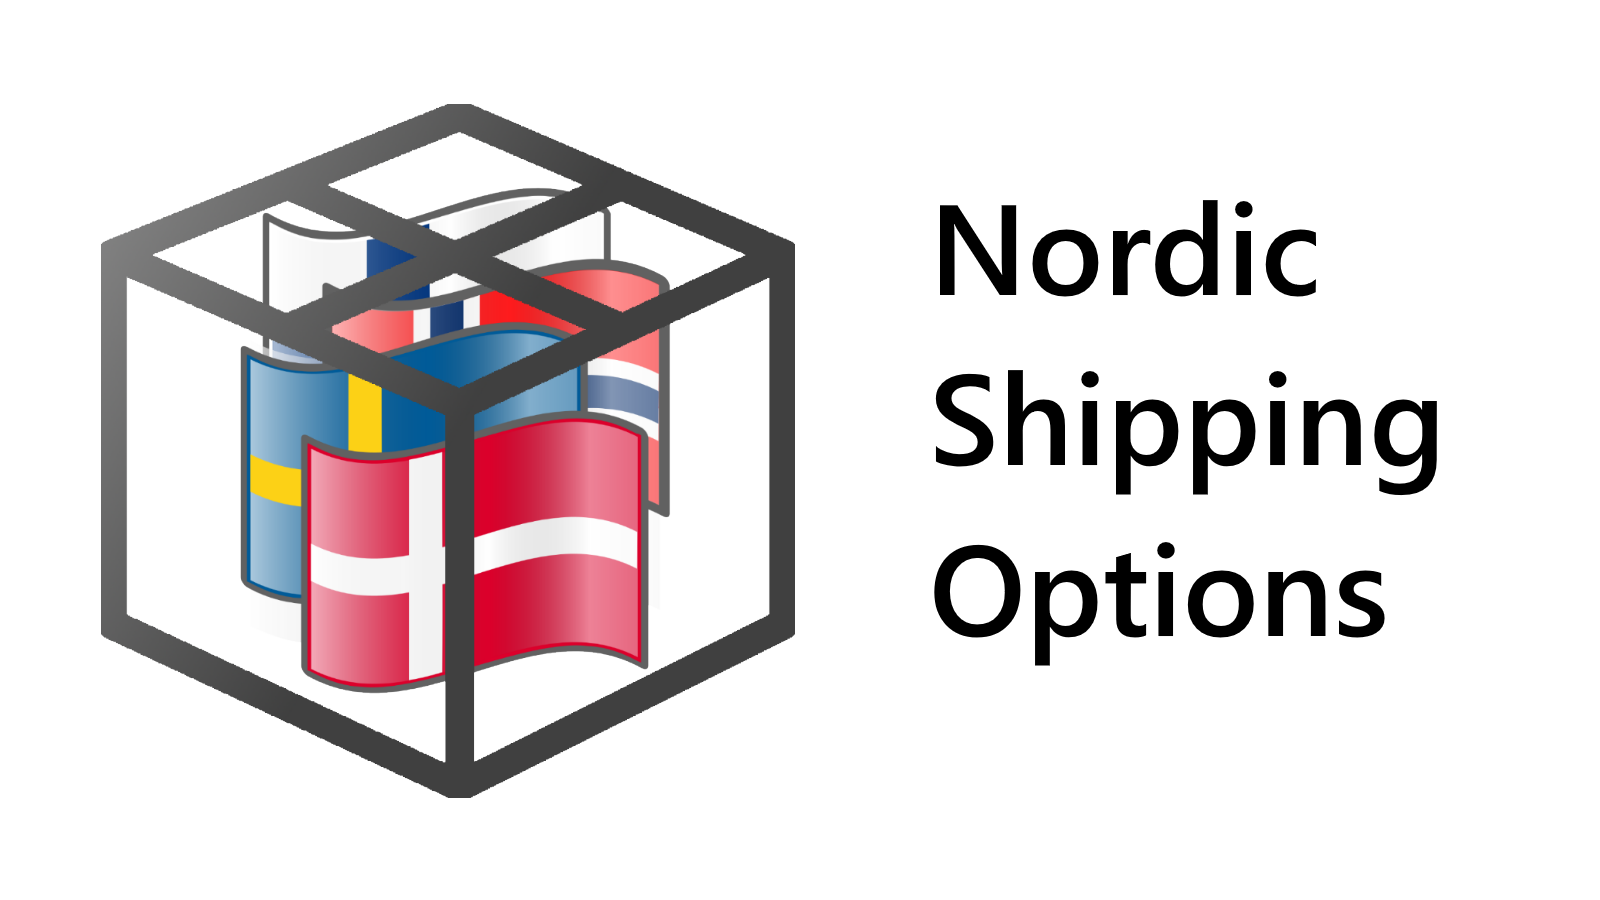 Nordic Shipping Options